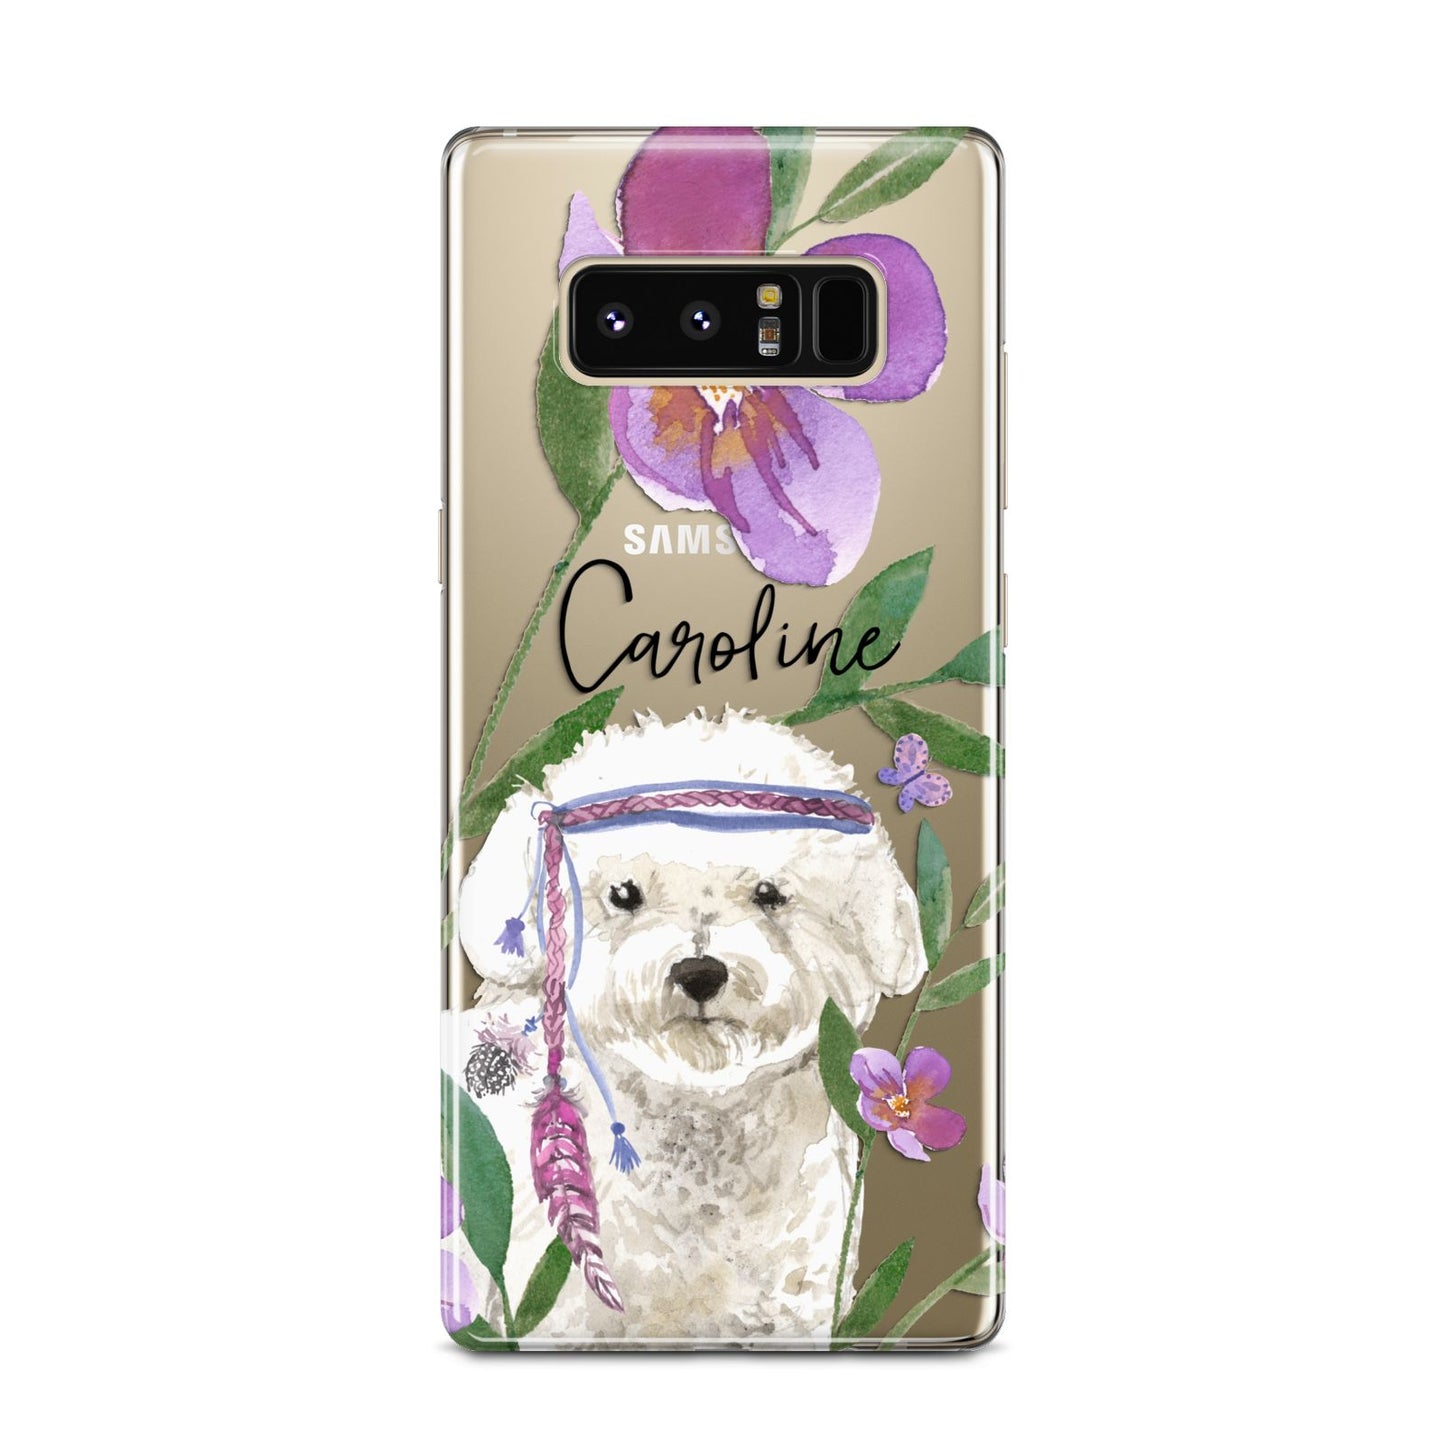 Personalised Bichon Frise Samsung Galaxy Note 8 Case